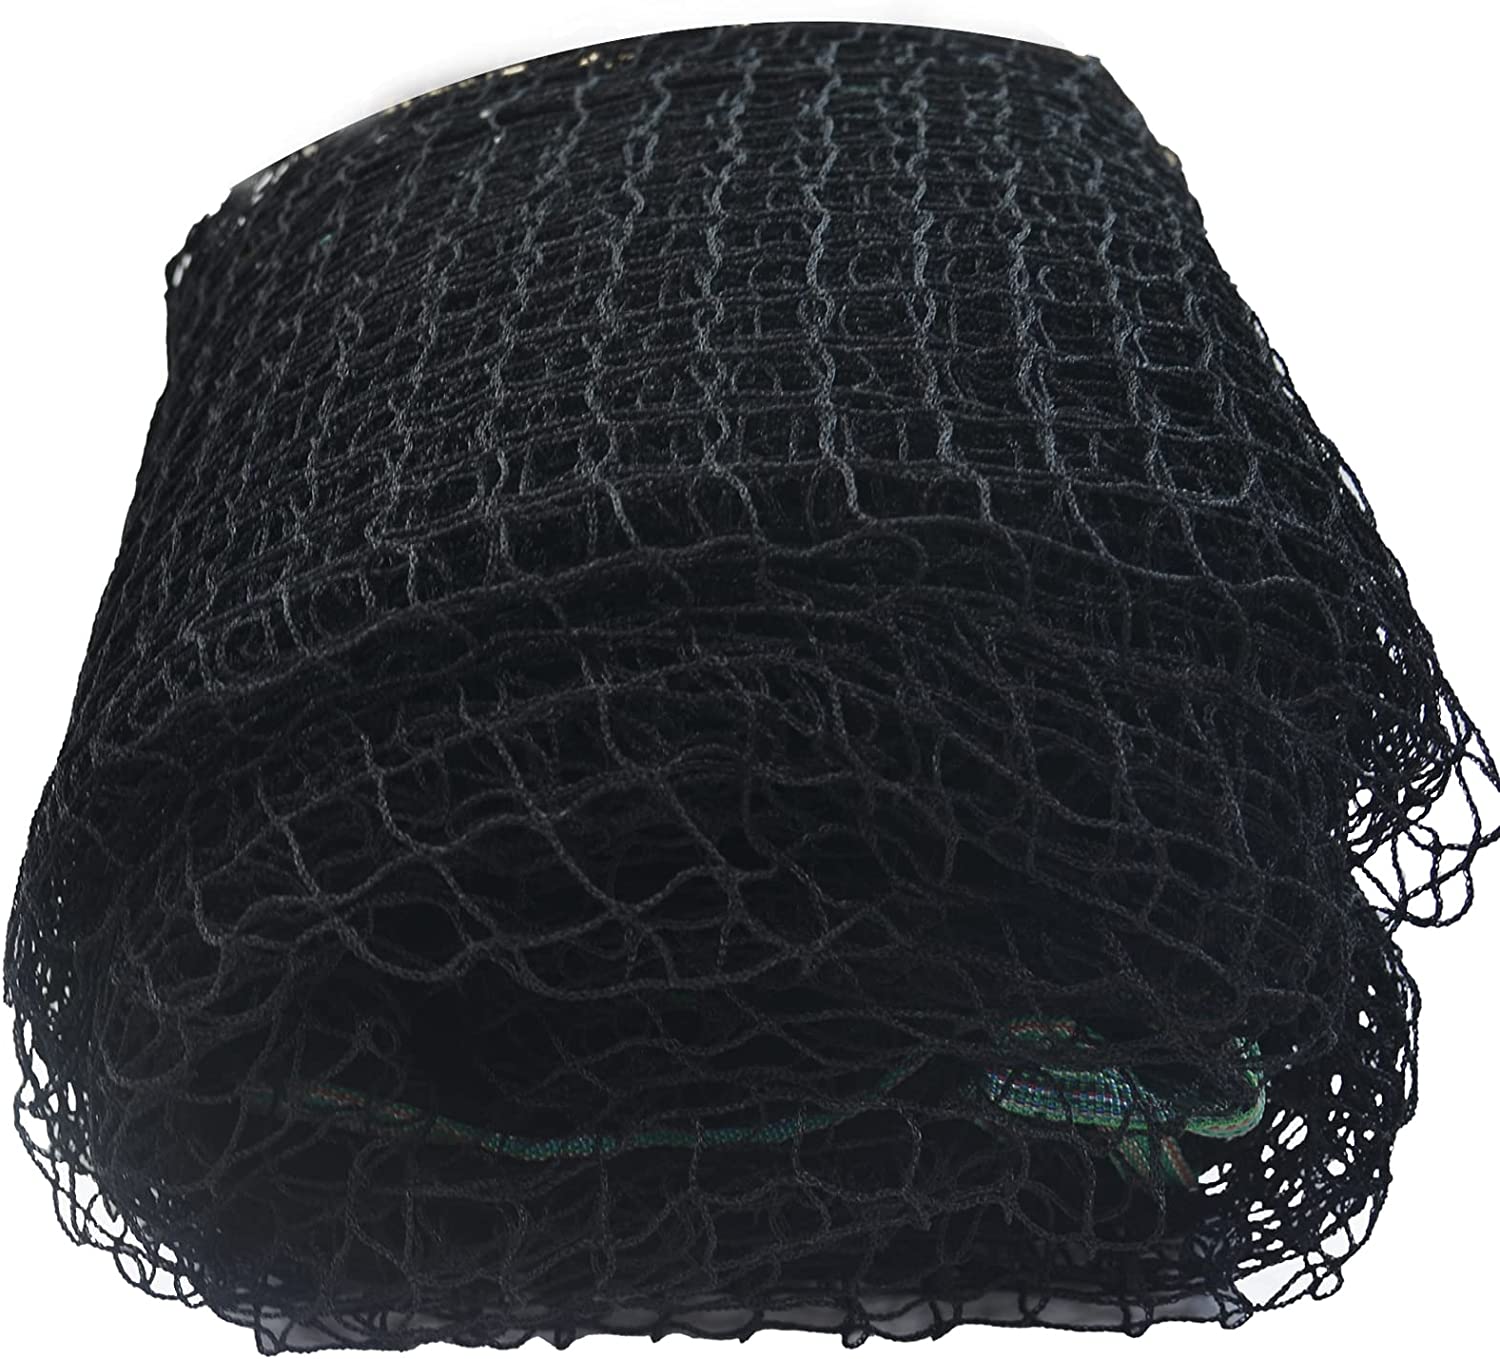 Gagalileo 44x12x10FT Baseball Batting Cage Replacement Net